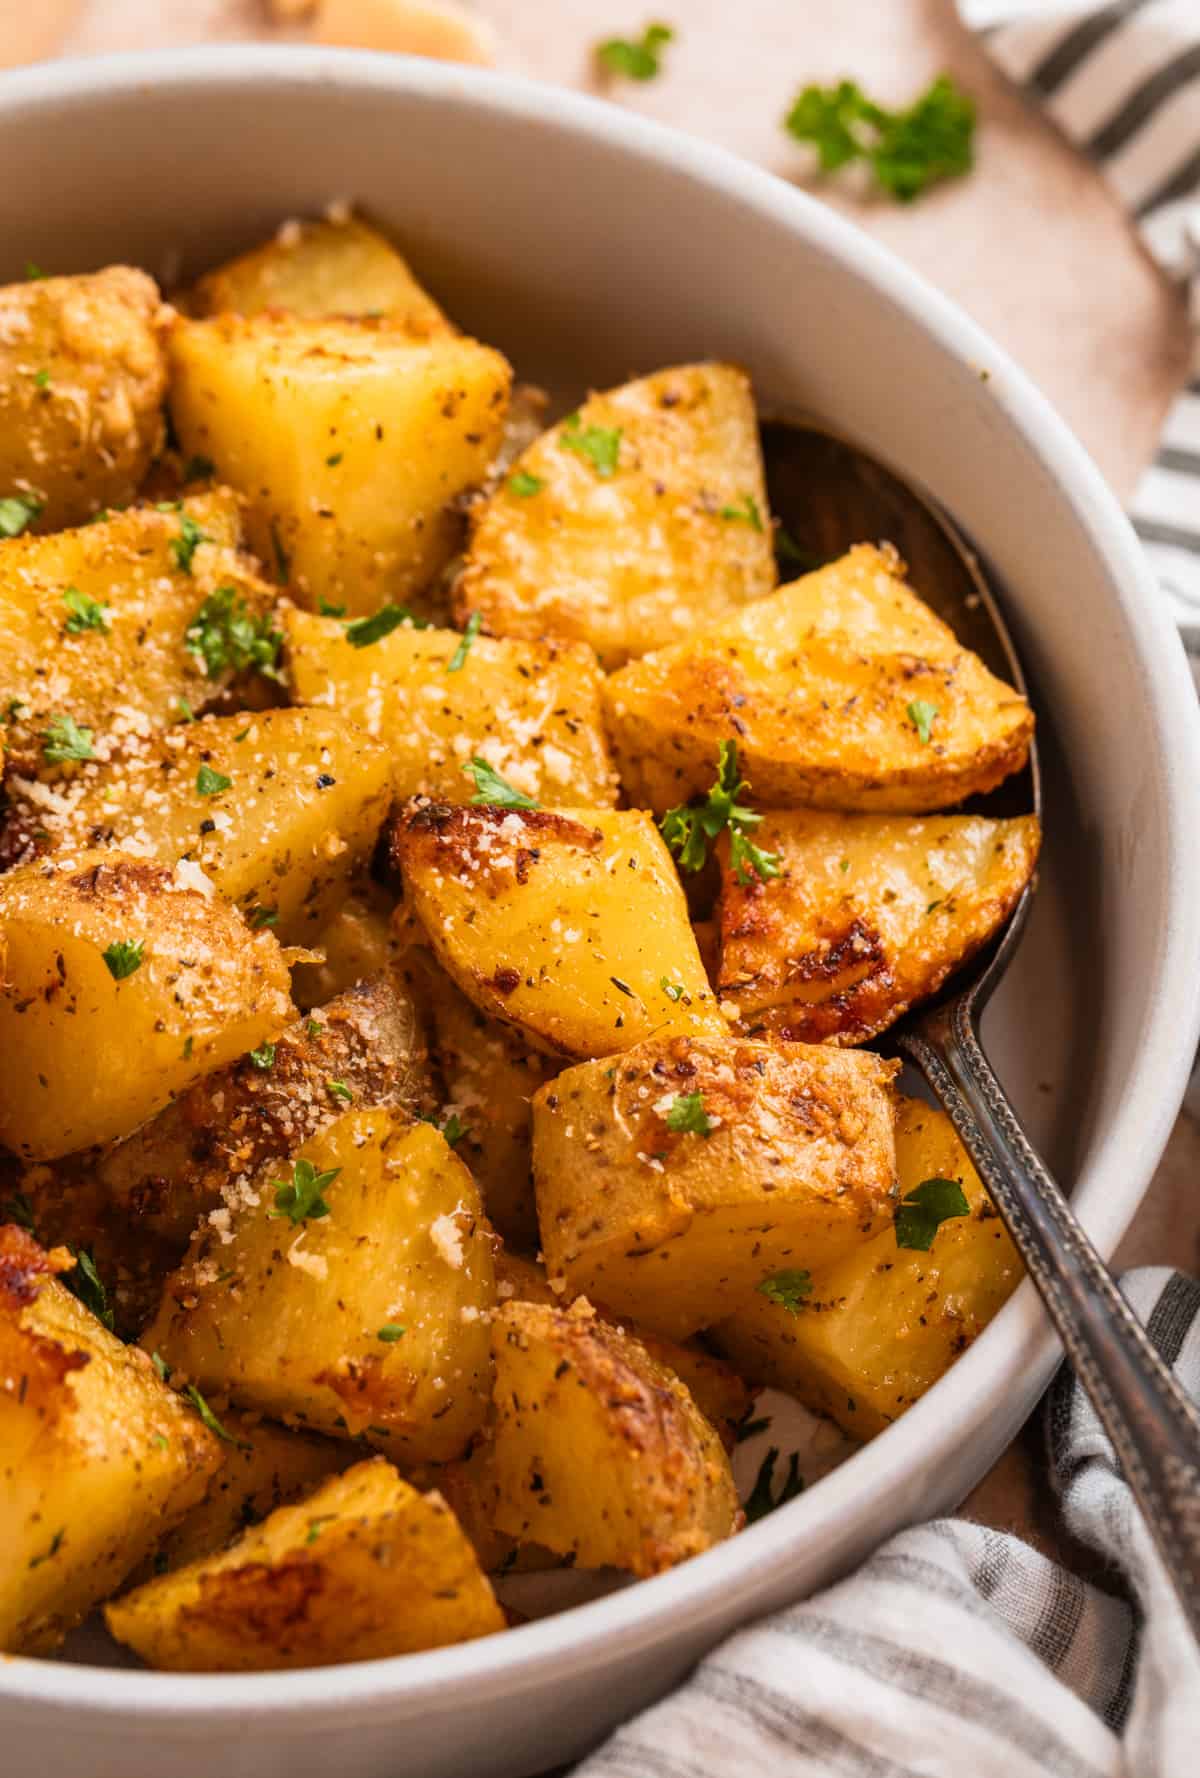 Parmesan crusted potatoes in serving bowl with freshly grated parmesan and chopped parsley on top.